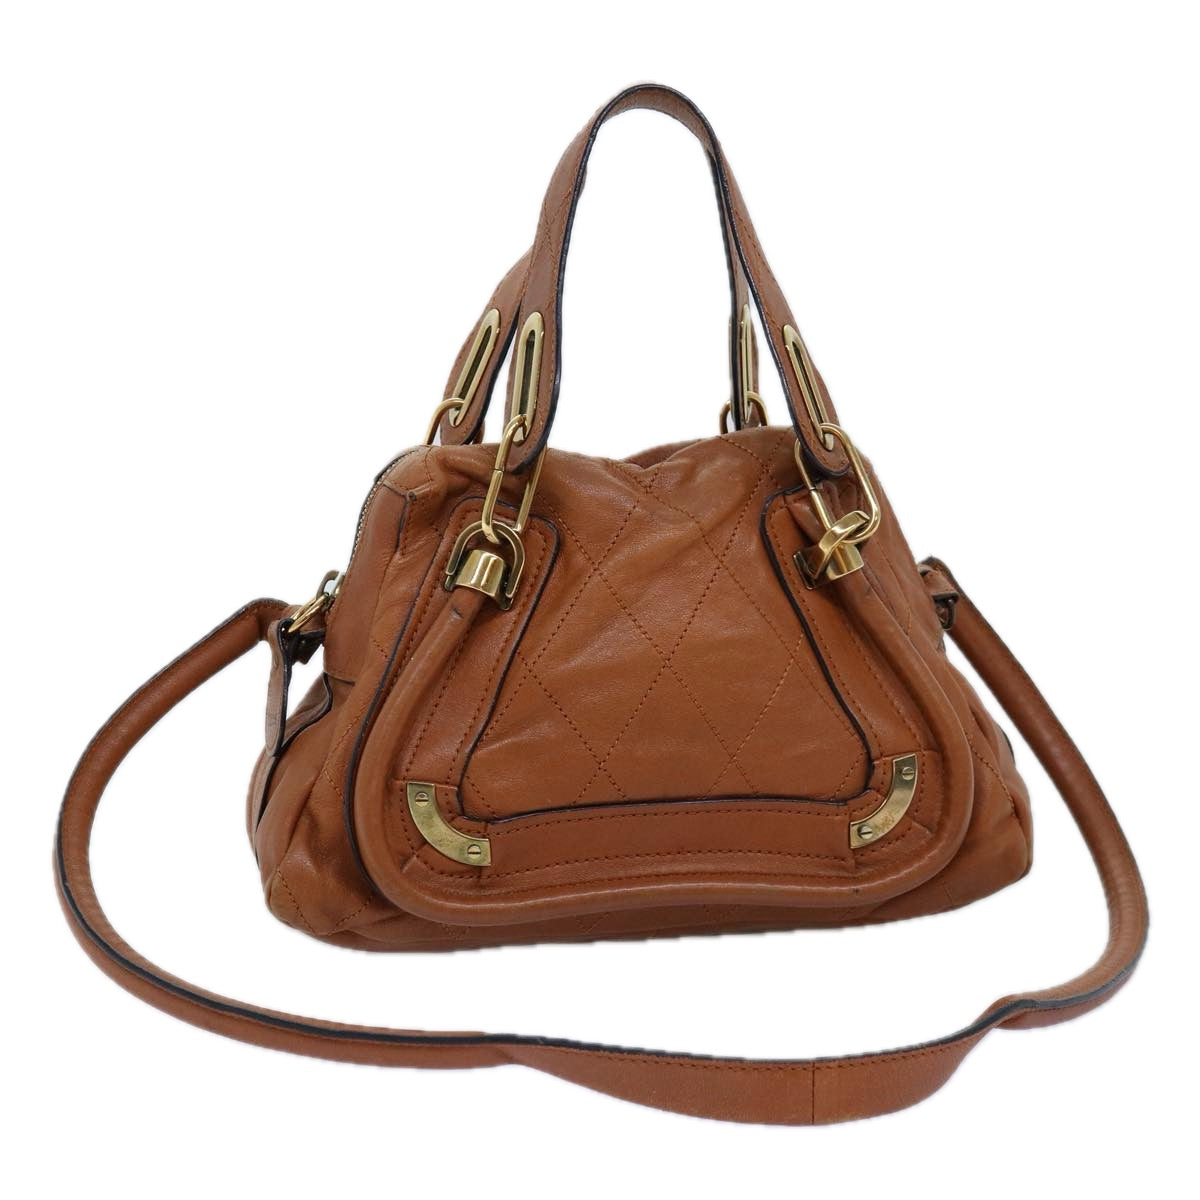 Chloe Paraty Hand Bag Leather 2way Brown Auth am6238